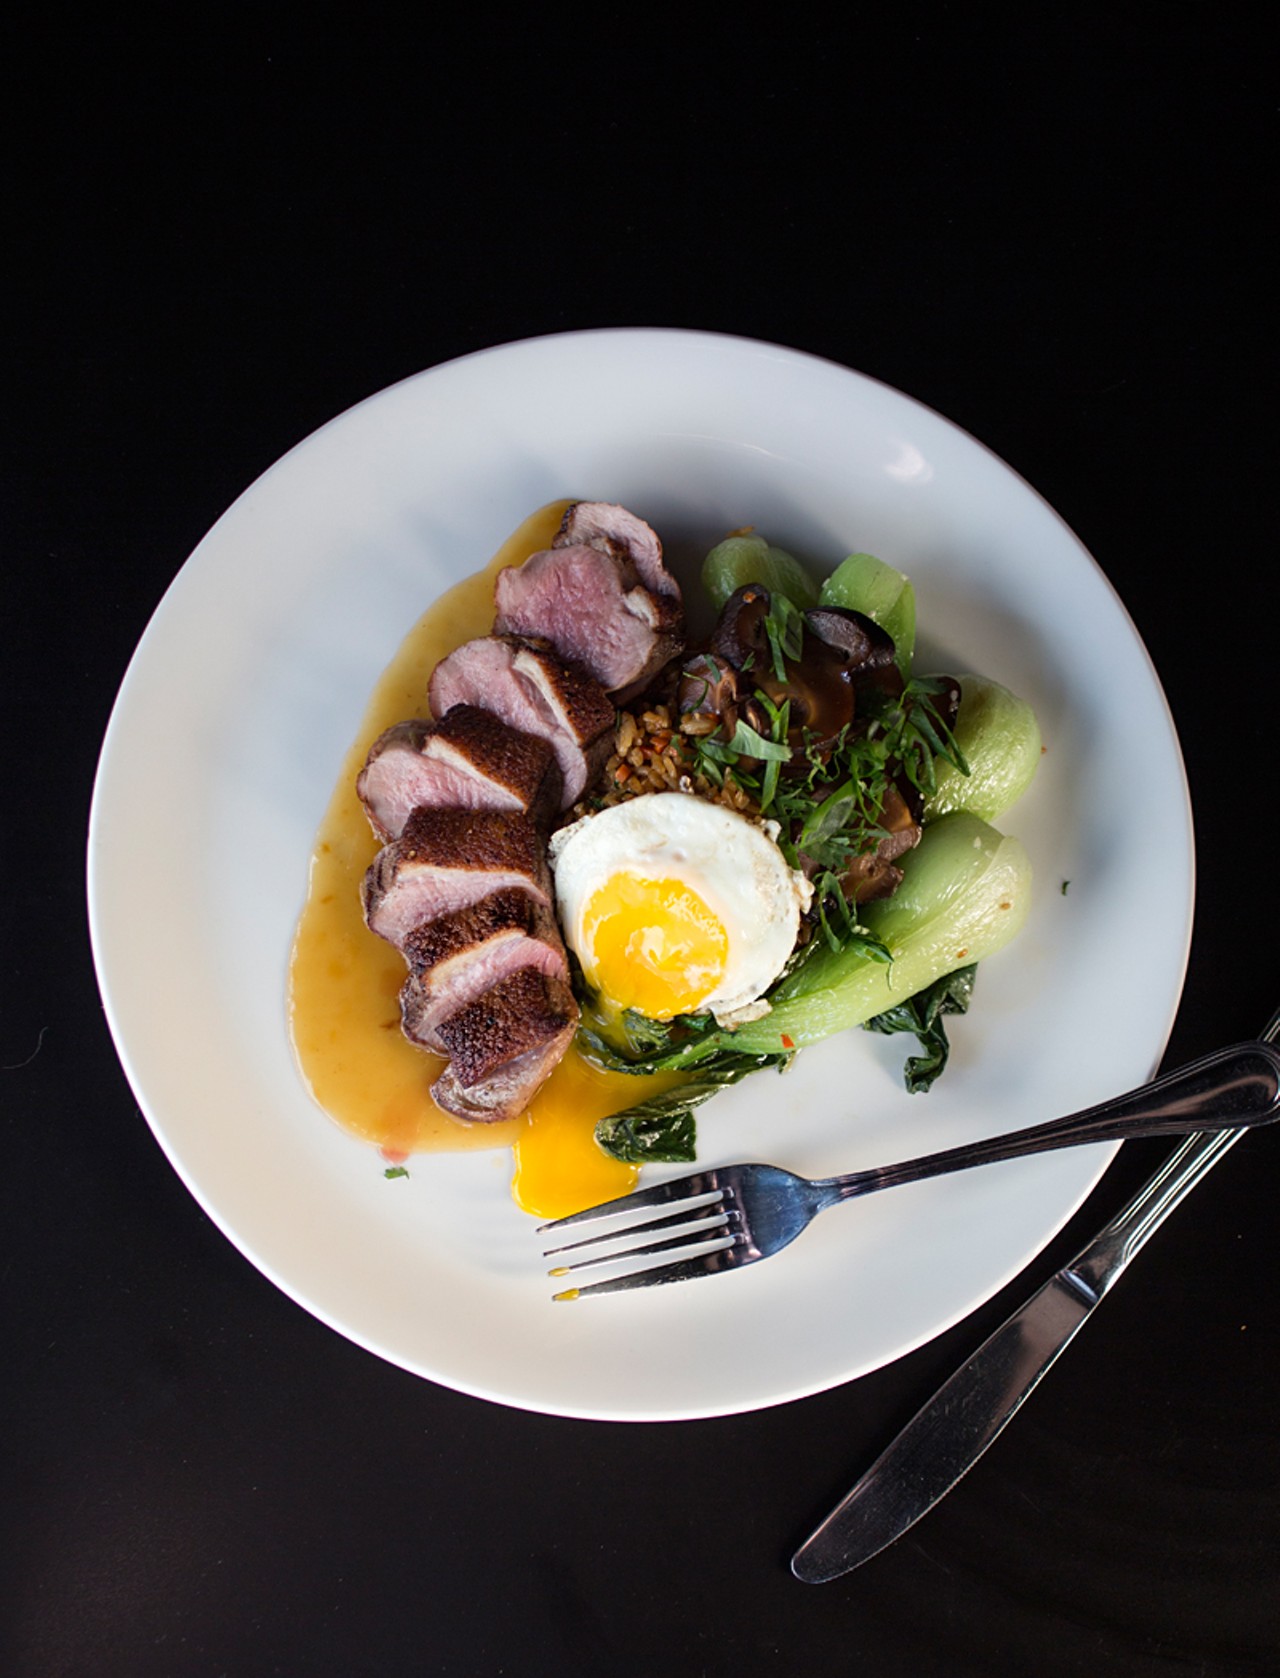 Duck breast comes with pickled shiitake mushrooms and bok choy.